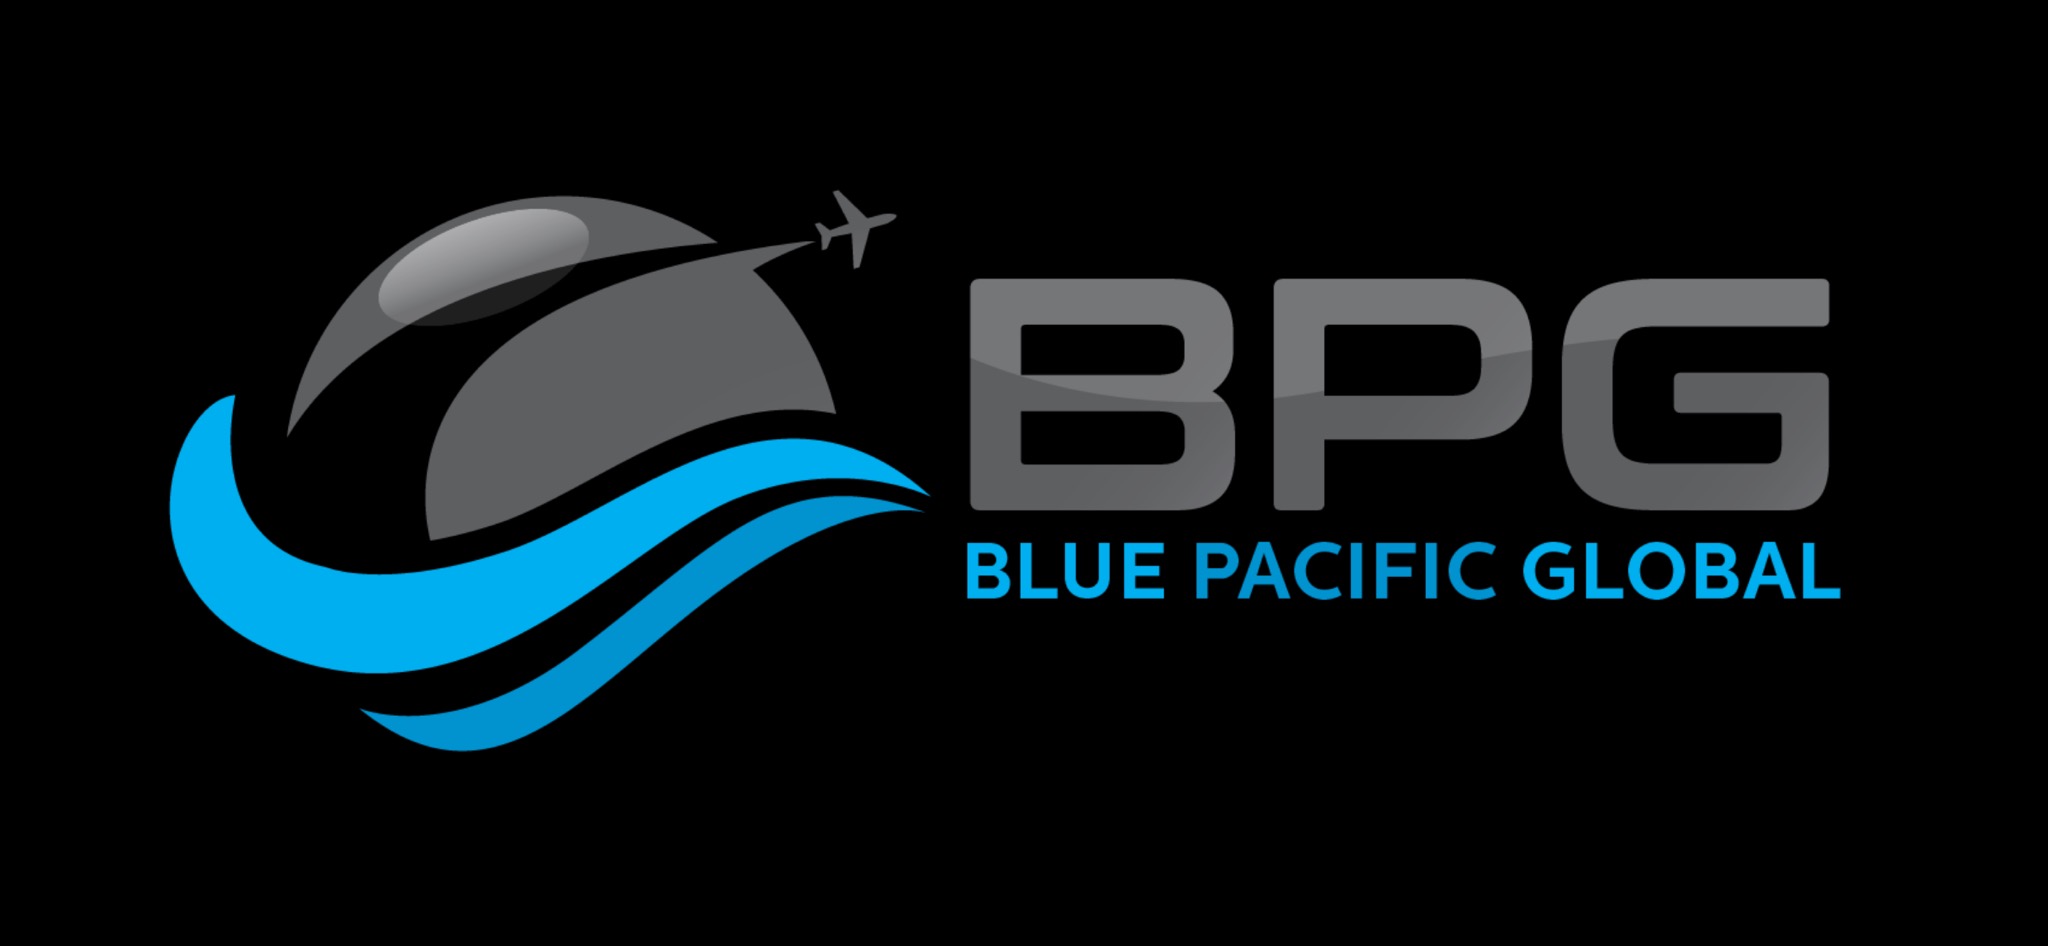 Blue Pacific Global